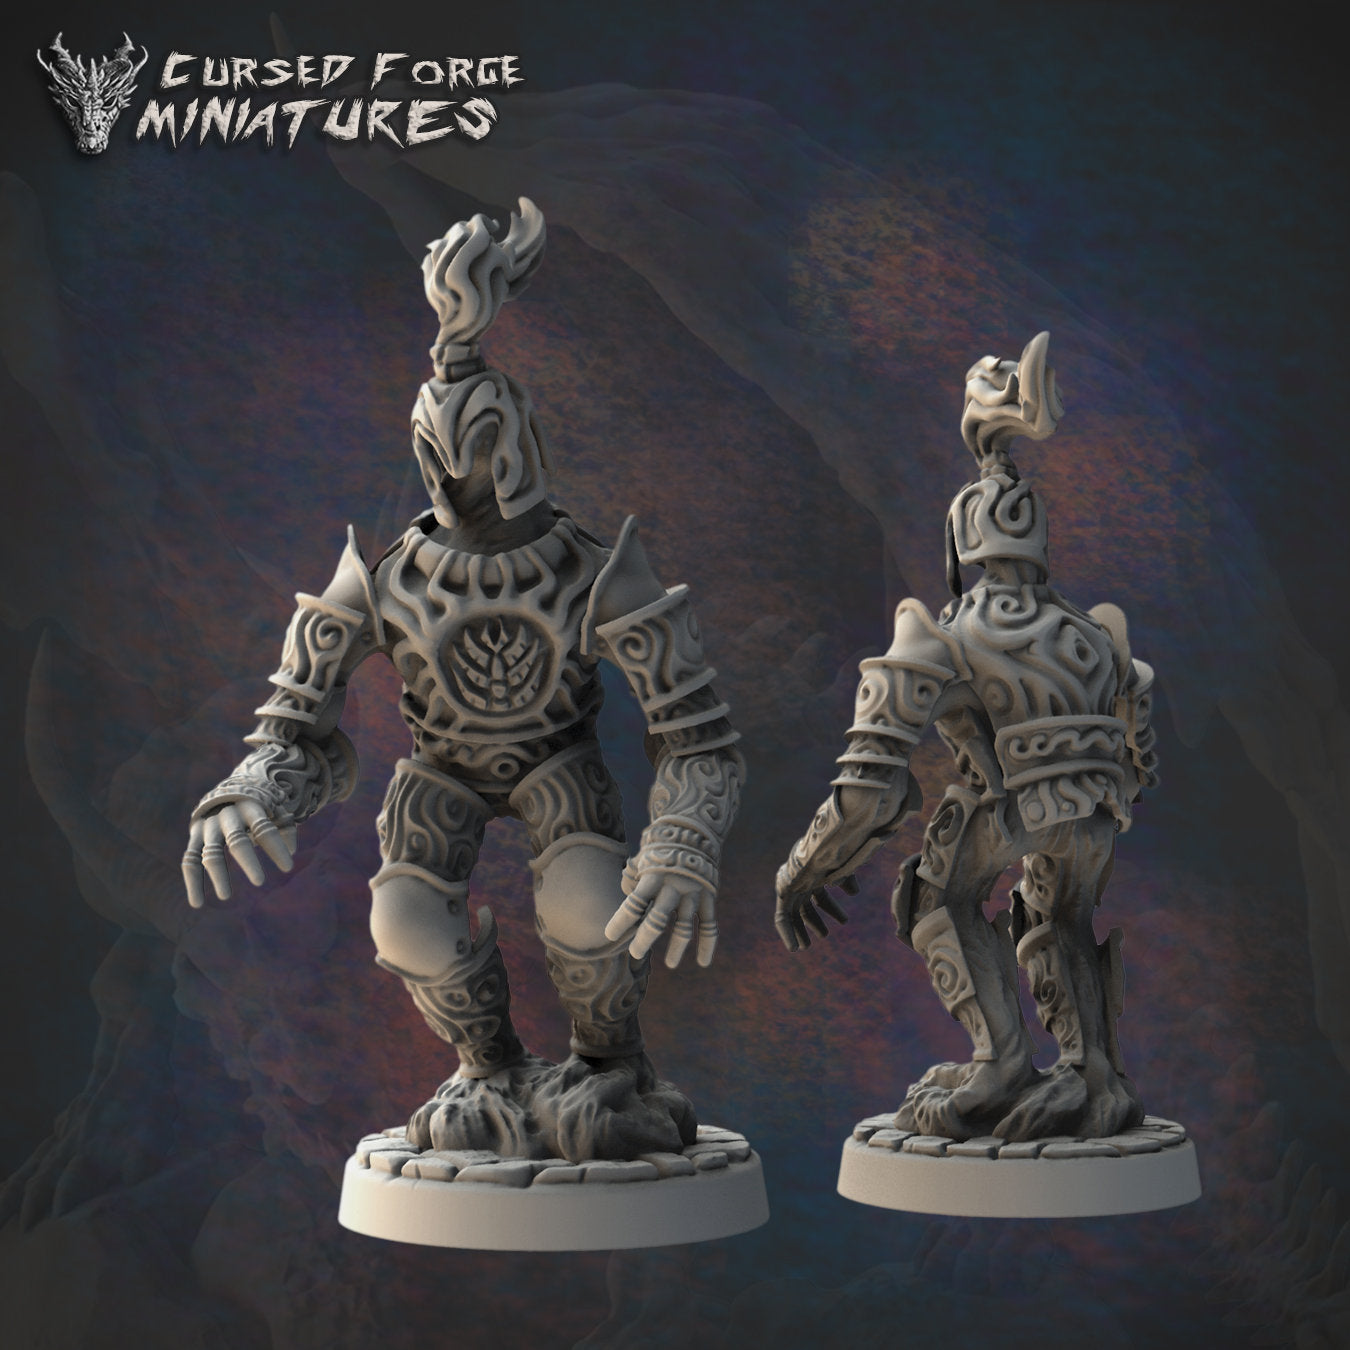 ANIMATED ARMOR, by Cursed Forge Miniatures // 3D Print on Demand / D&D / Pathfinder / RPG